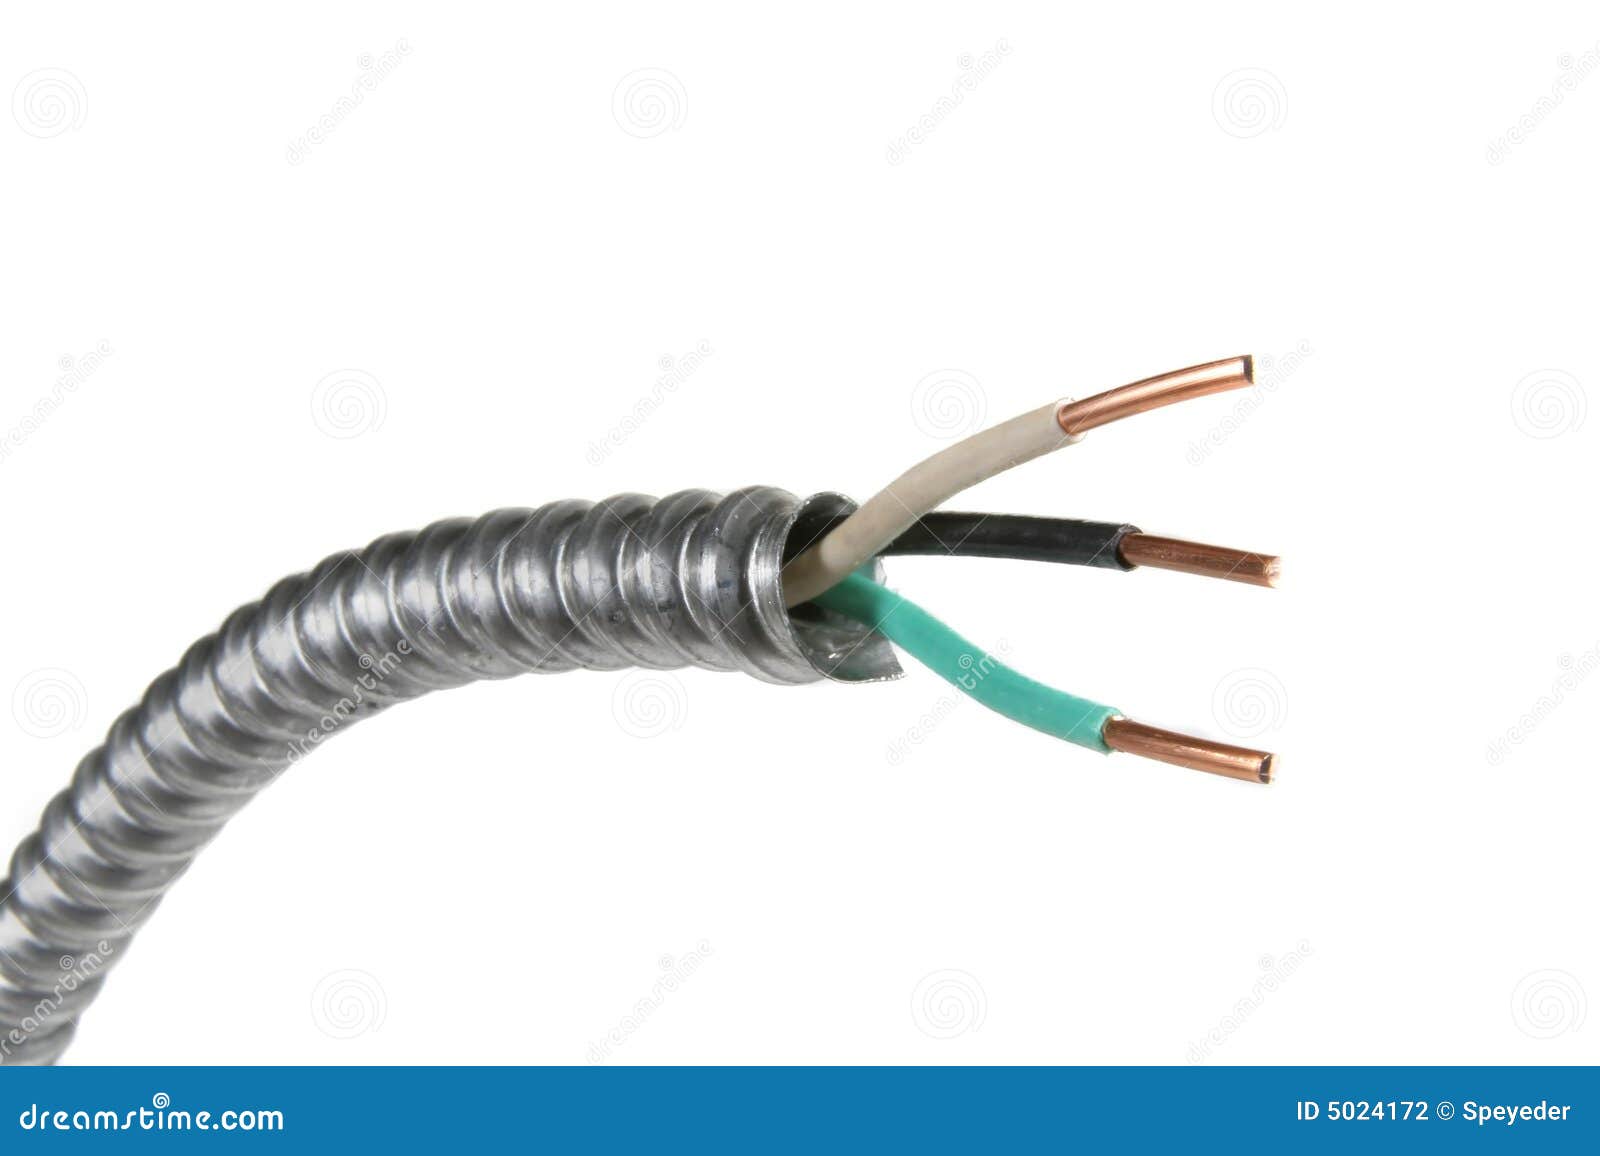 electrical wire